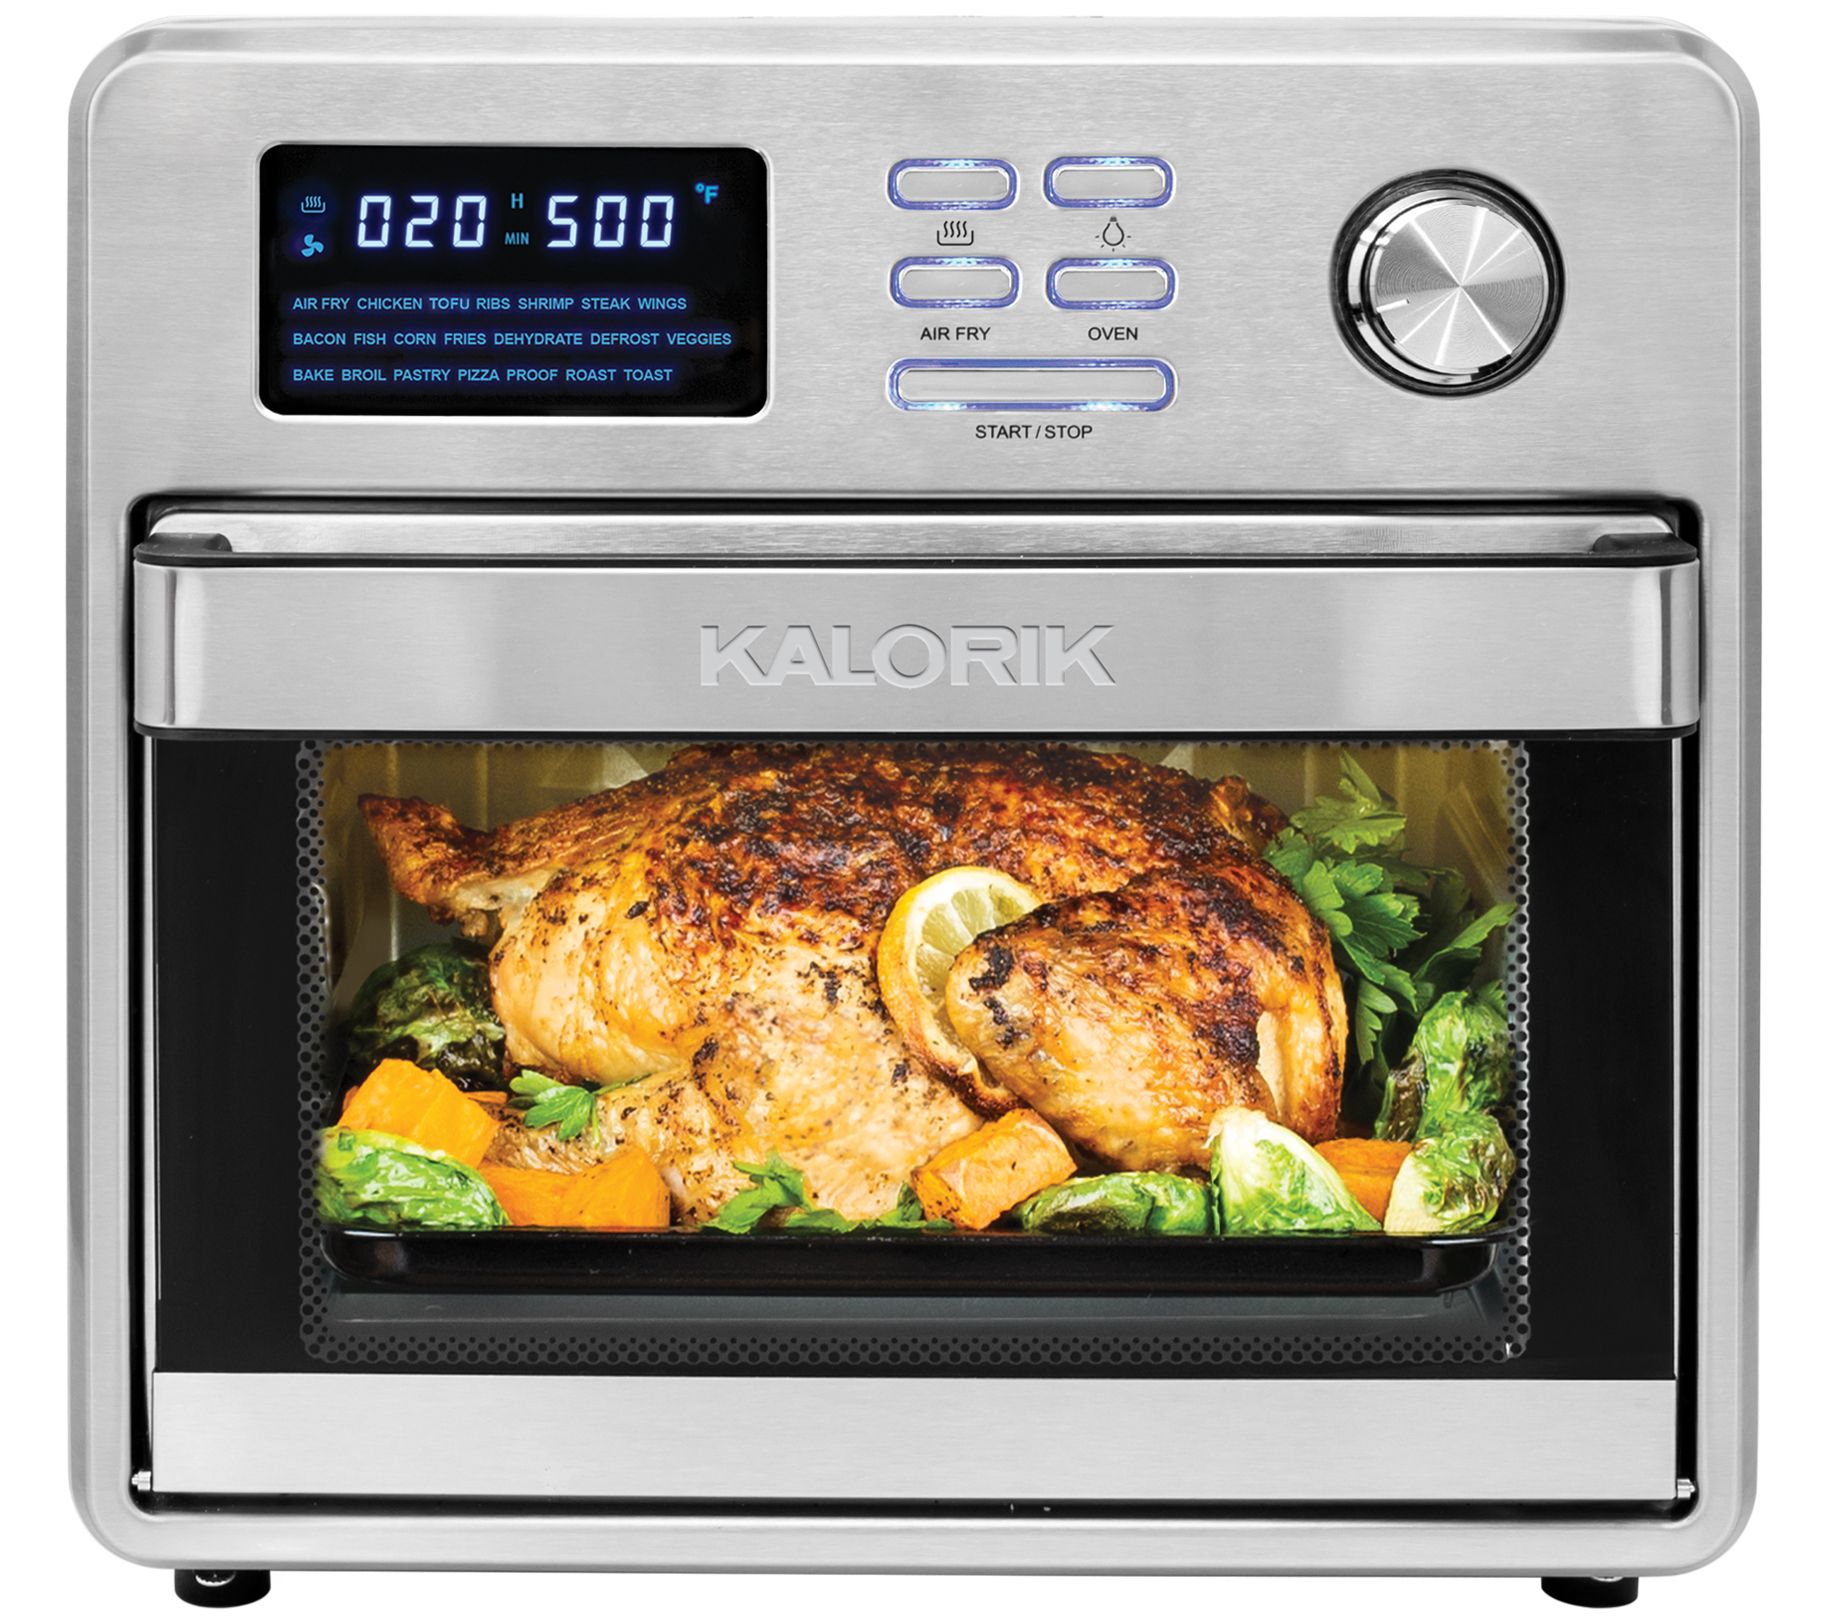 Chop21 Smokeless Air Fryer Oven Grill ,Stainless Steel